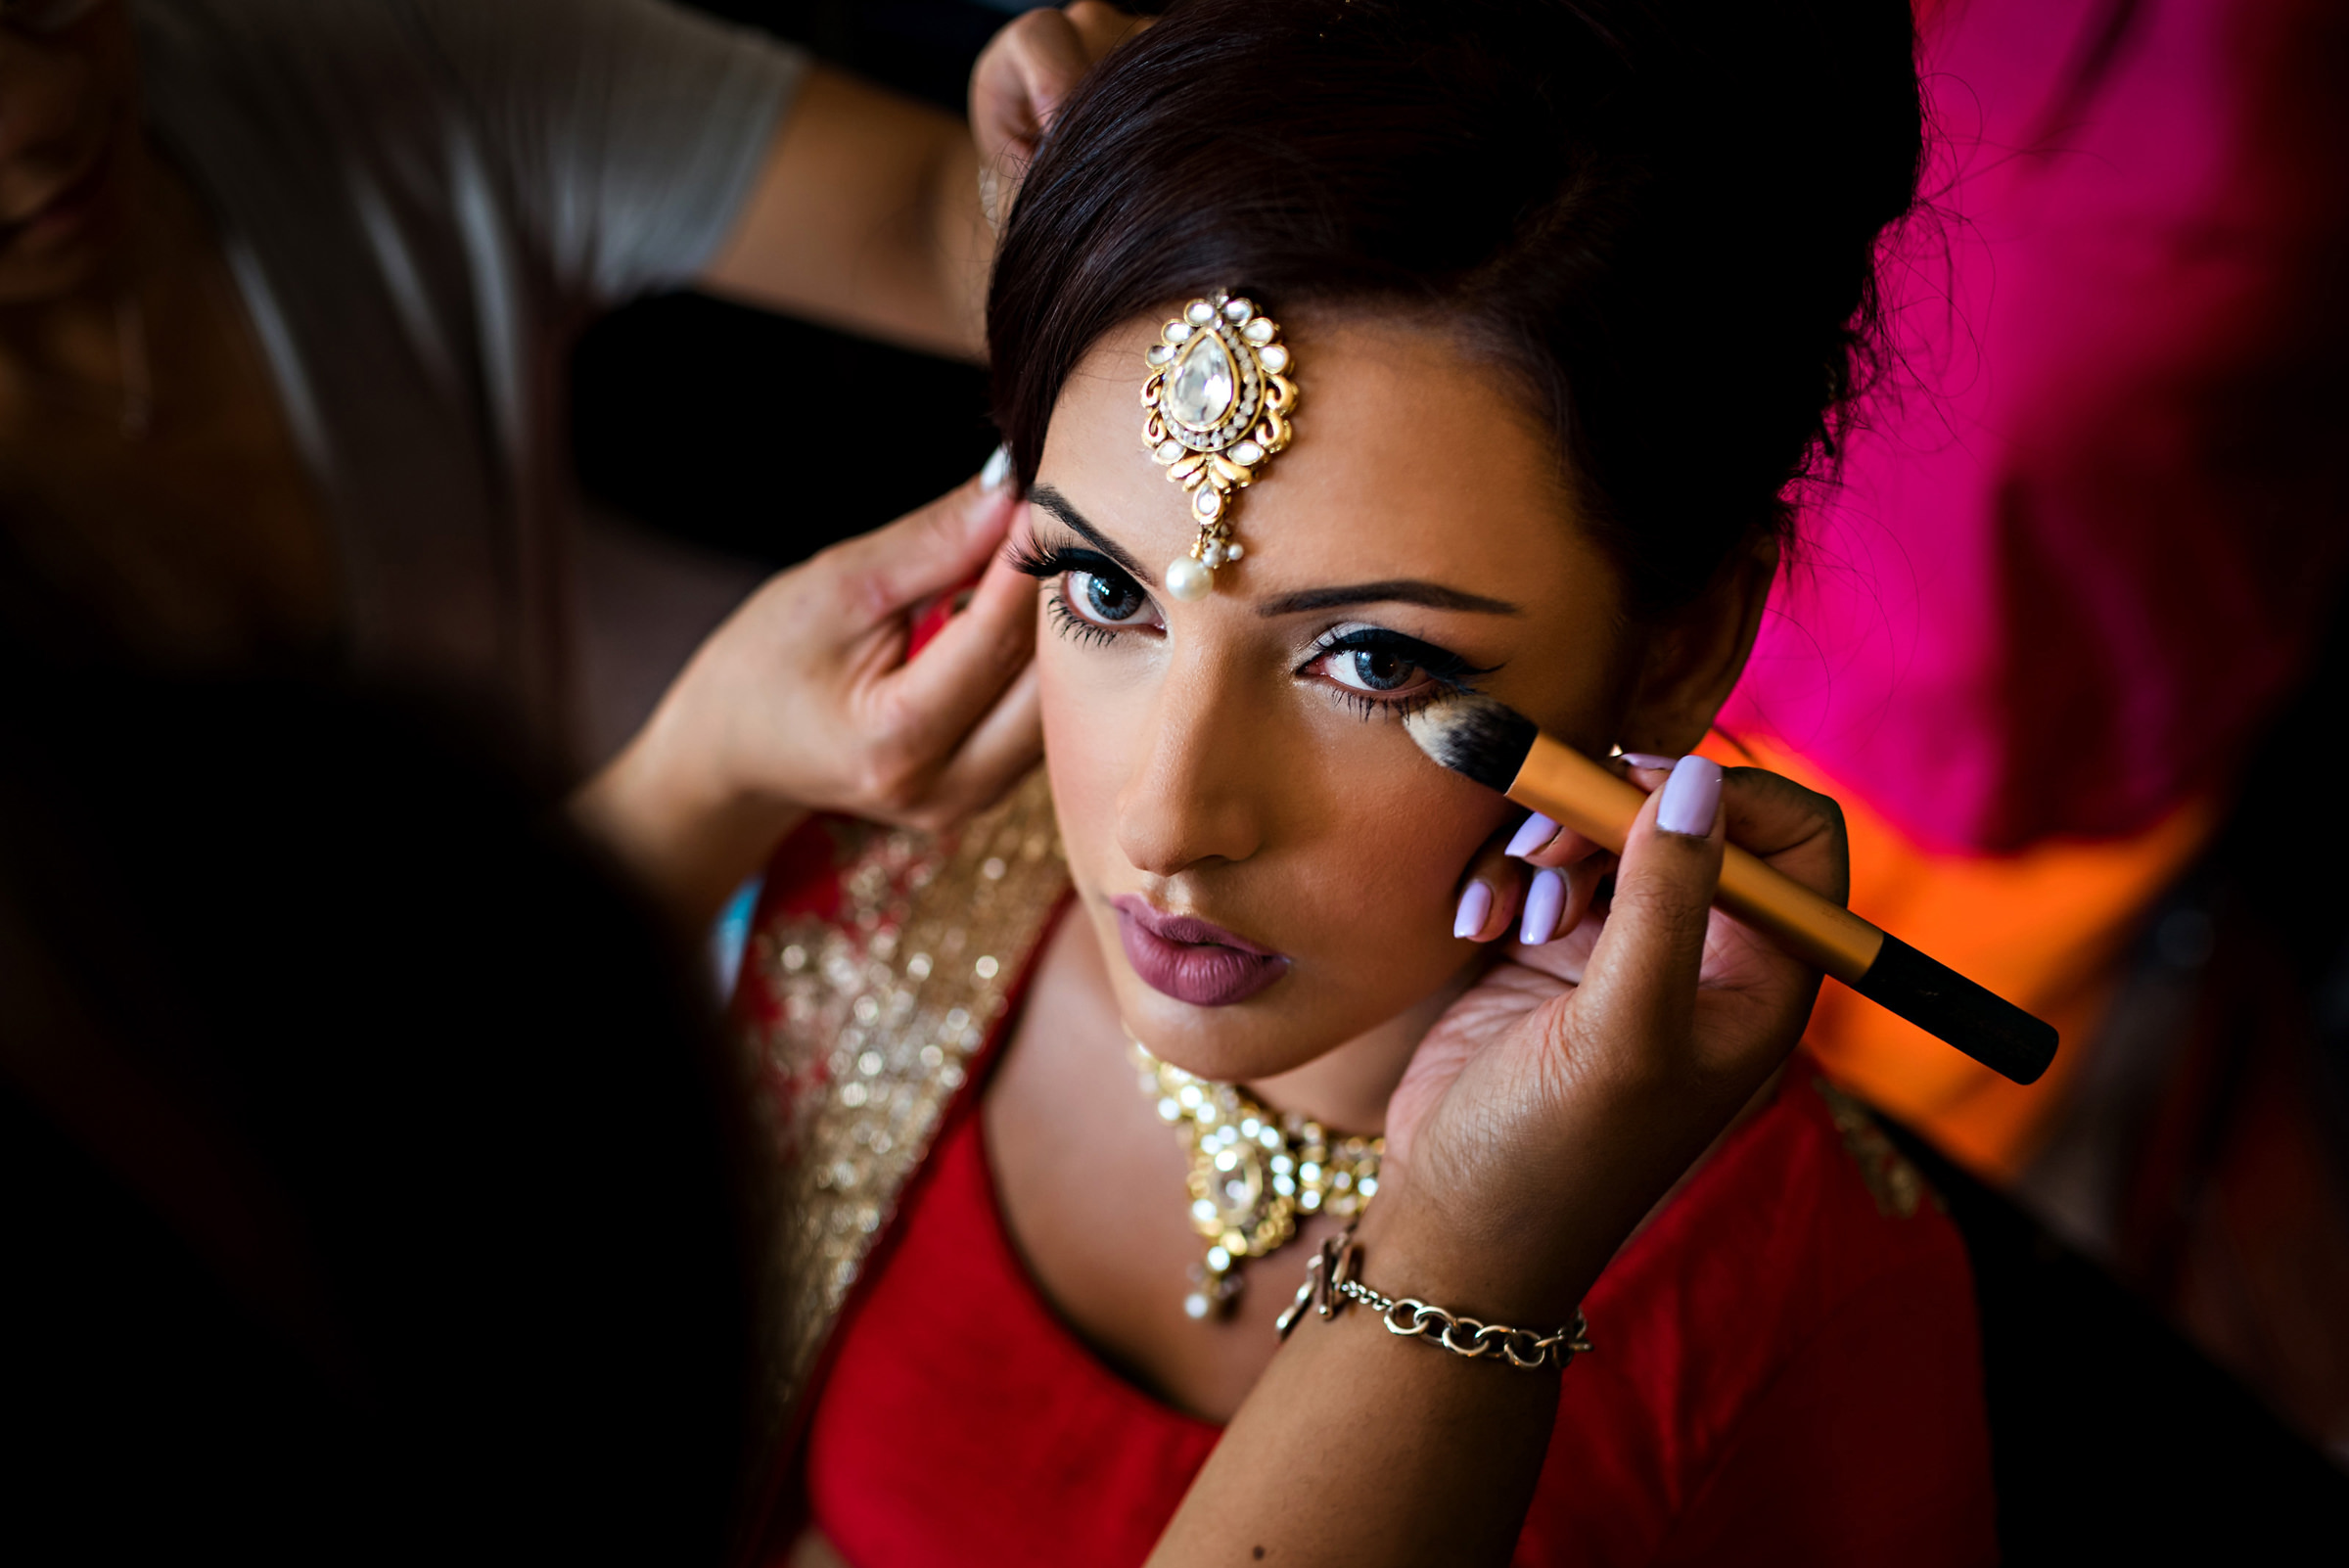 makeup-being-applied-to-bride-in-indian-wedding-attire-moore-photography_0